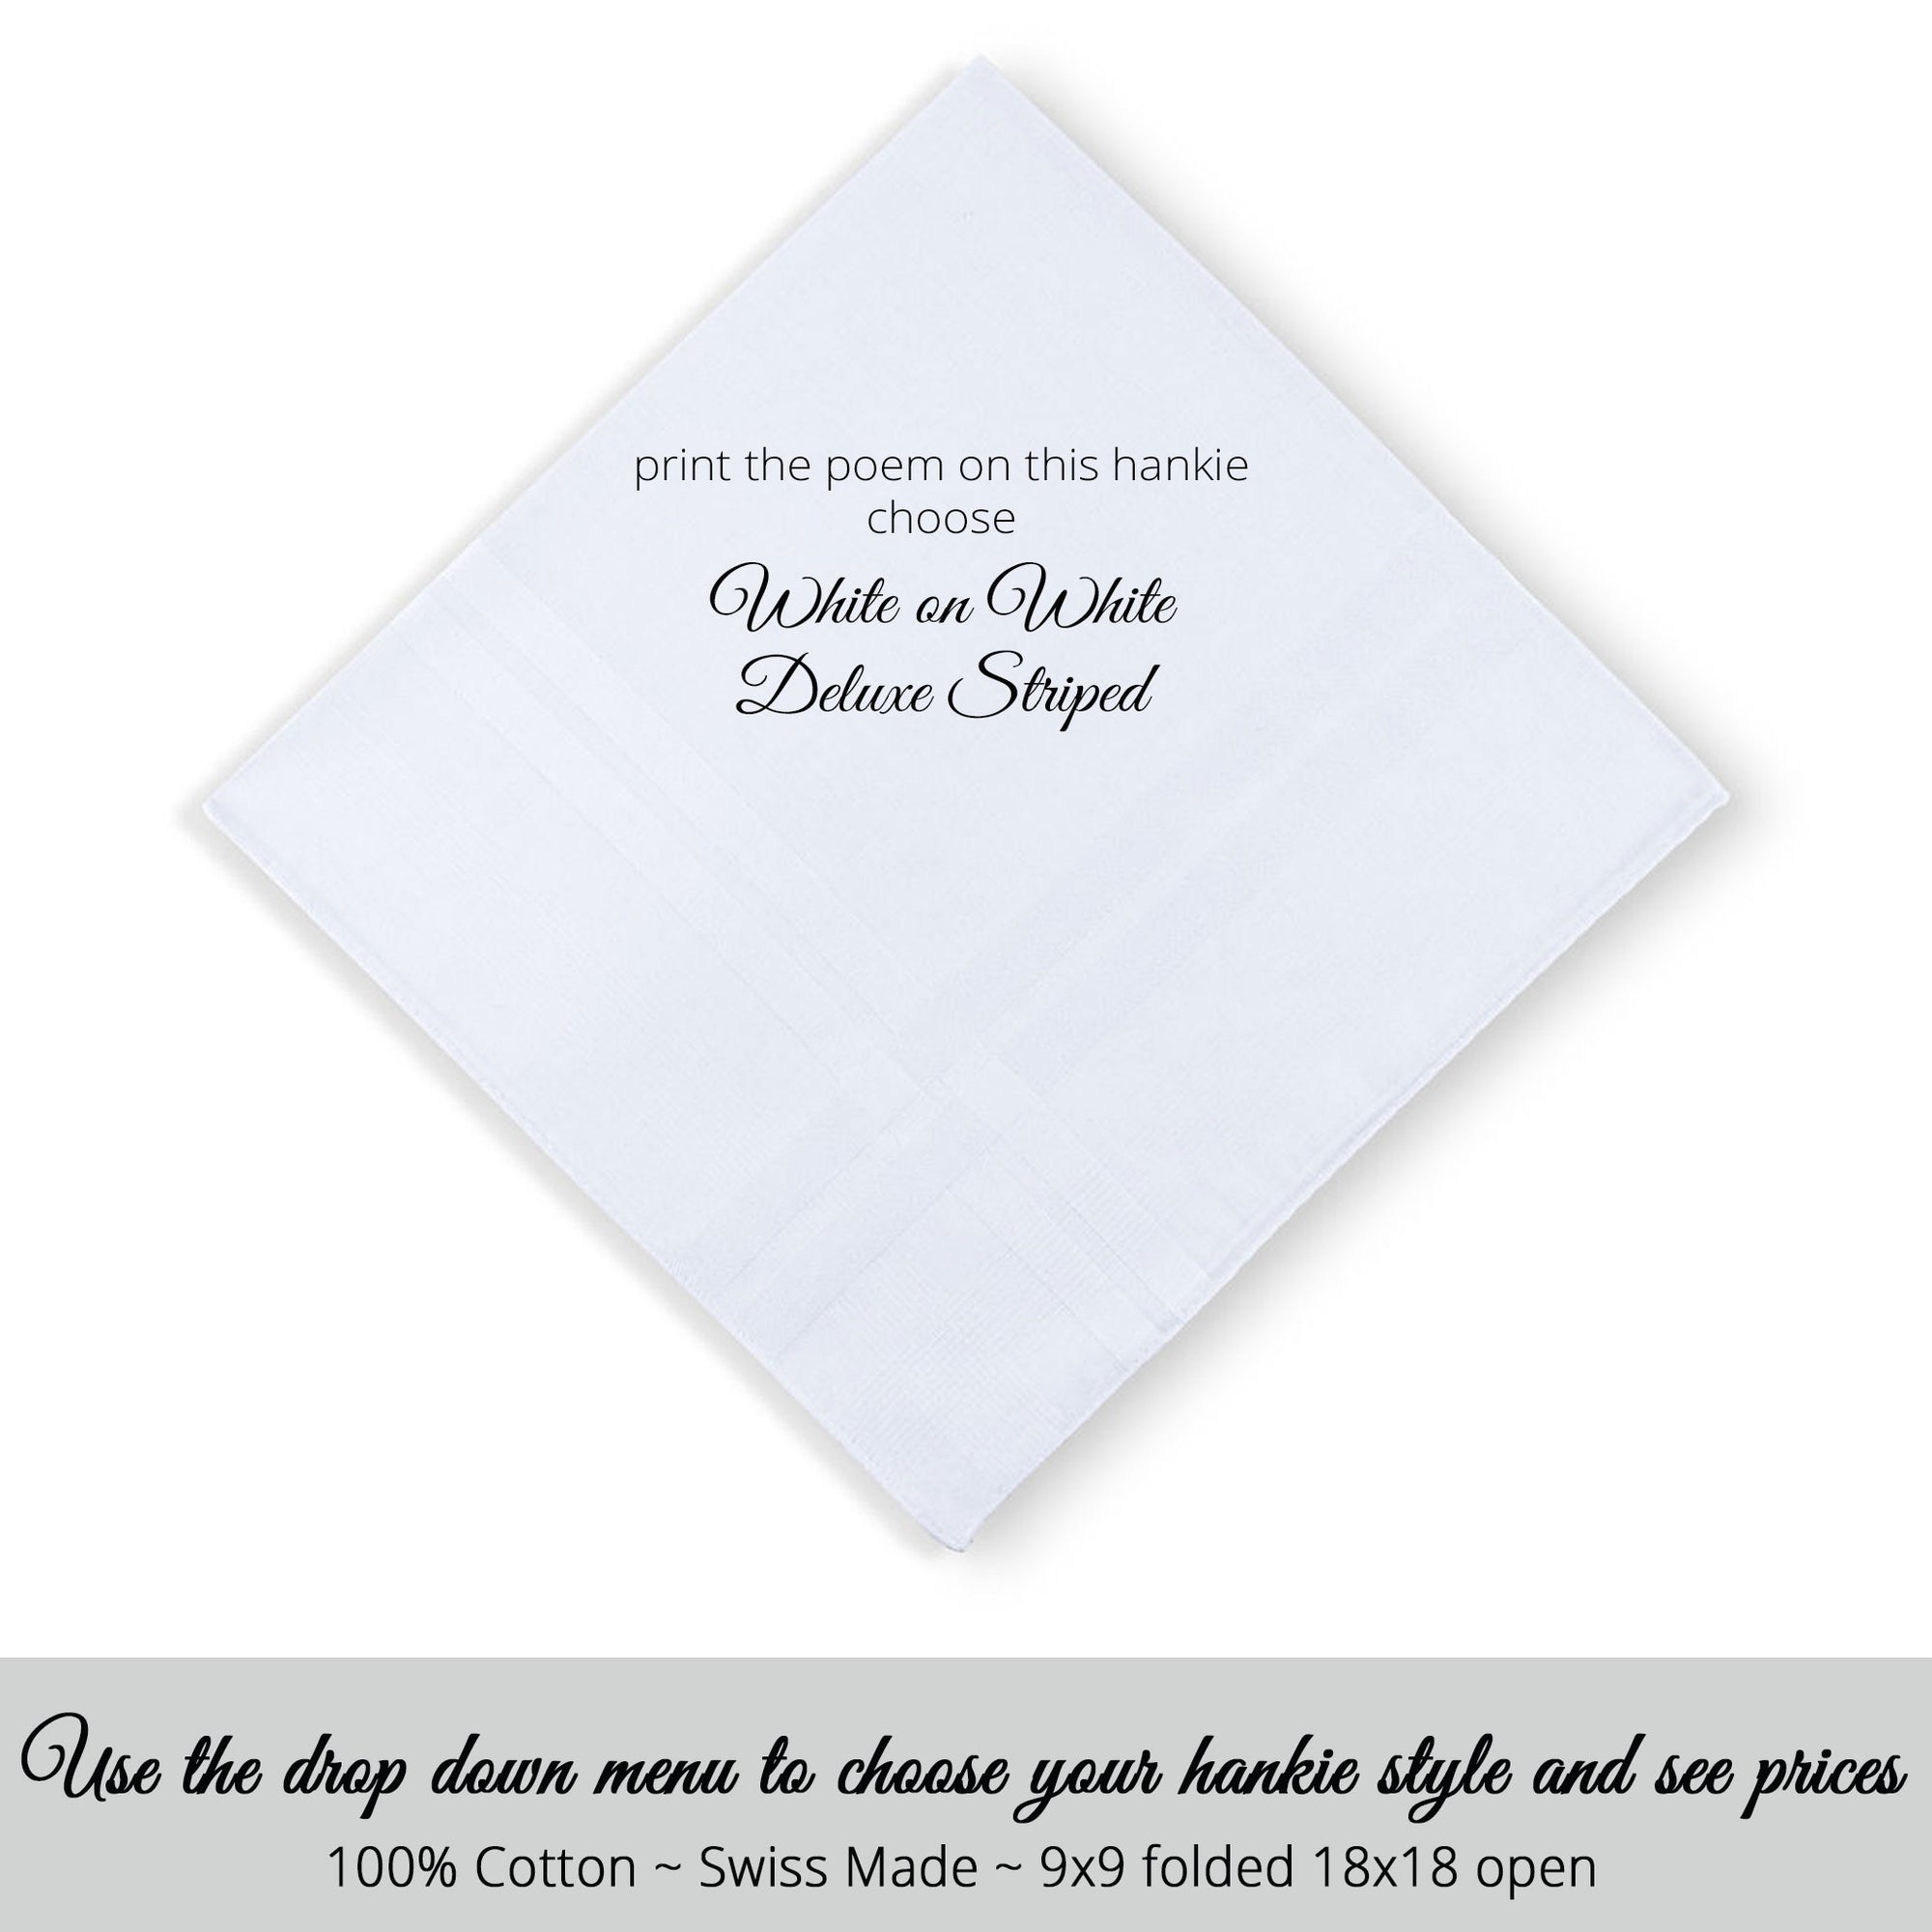 Gay Wedding Masculine Hankie style Swiss made white on white deluxe striped for a loved one or friend of the groom poem printed hankie